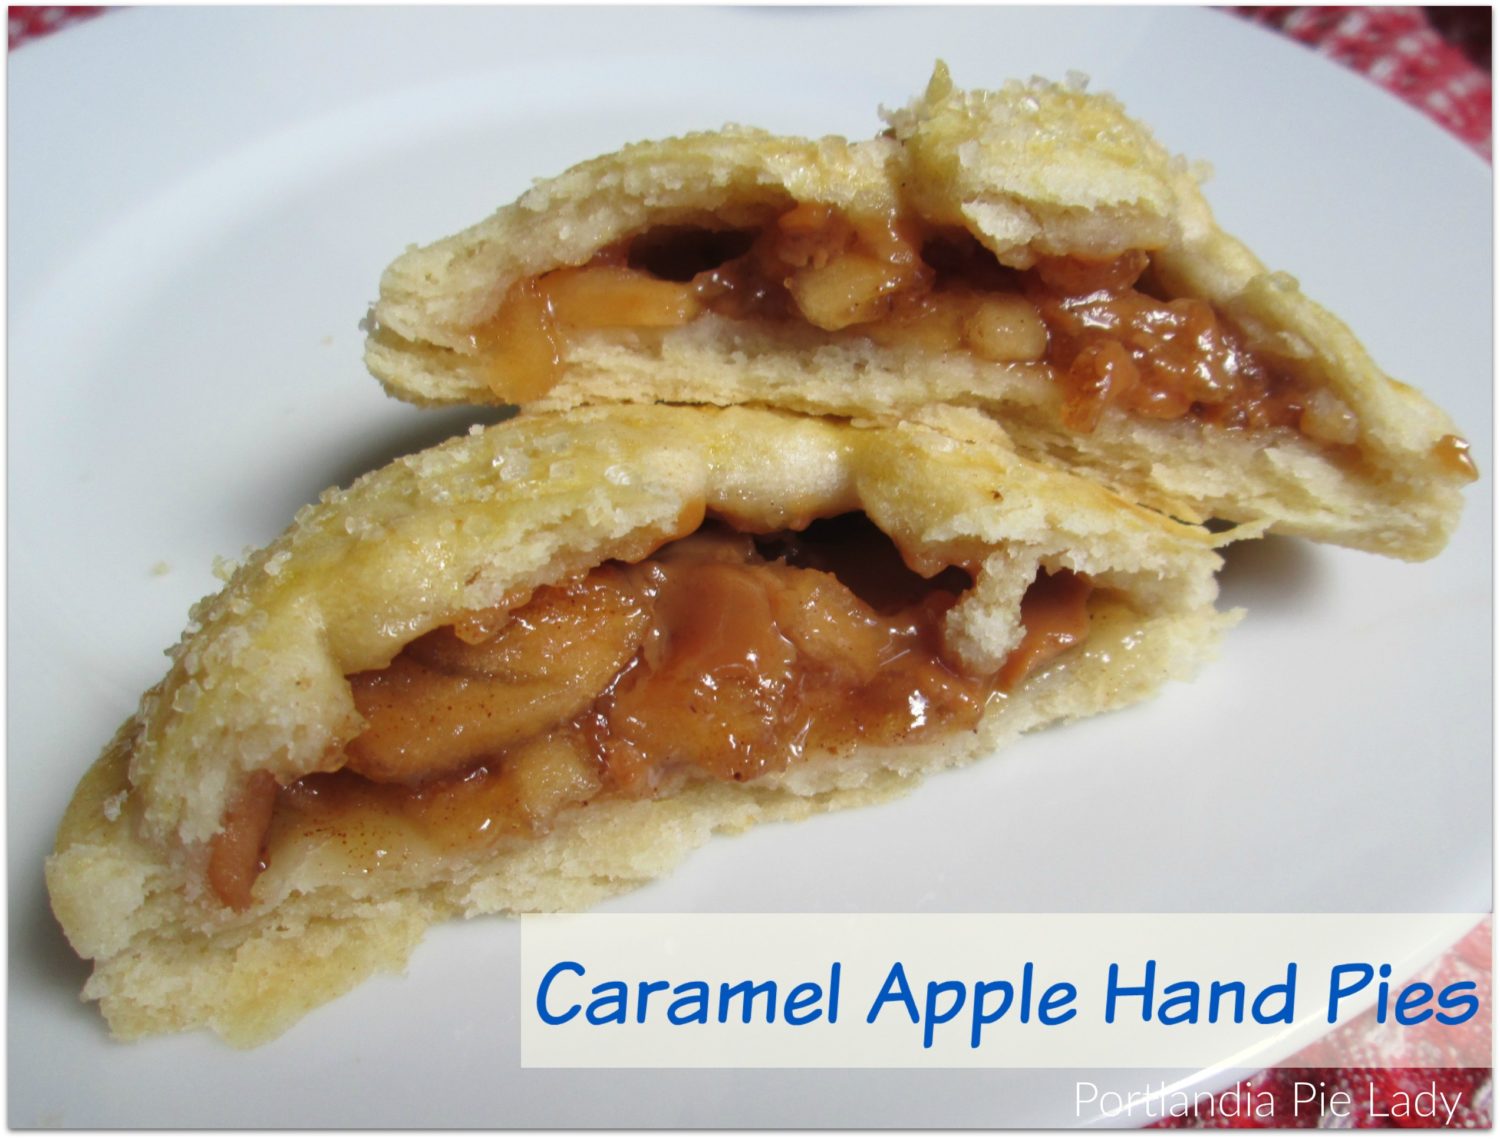 Caramel Apple Hand Pies a.k.a. Nature's Candy. Tart apples with melty caramel bits baked into buttery flaky crust, no forks needed!